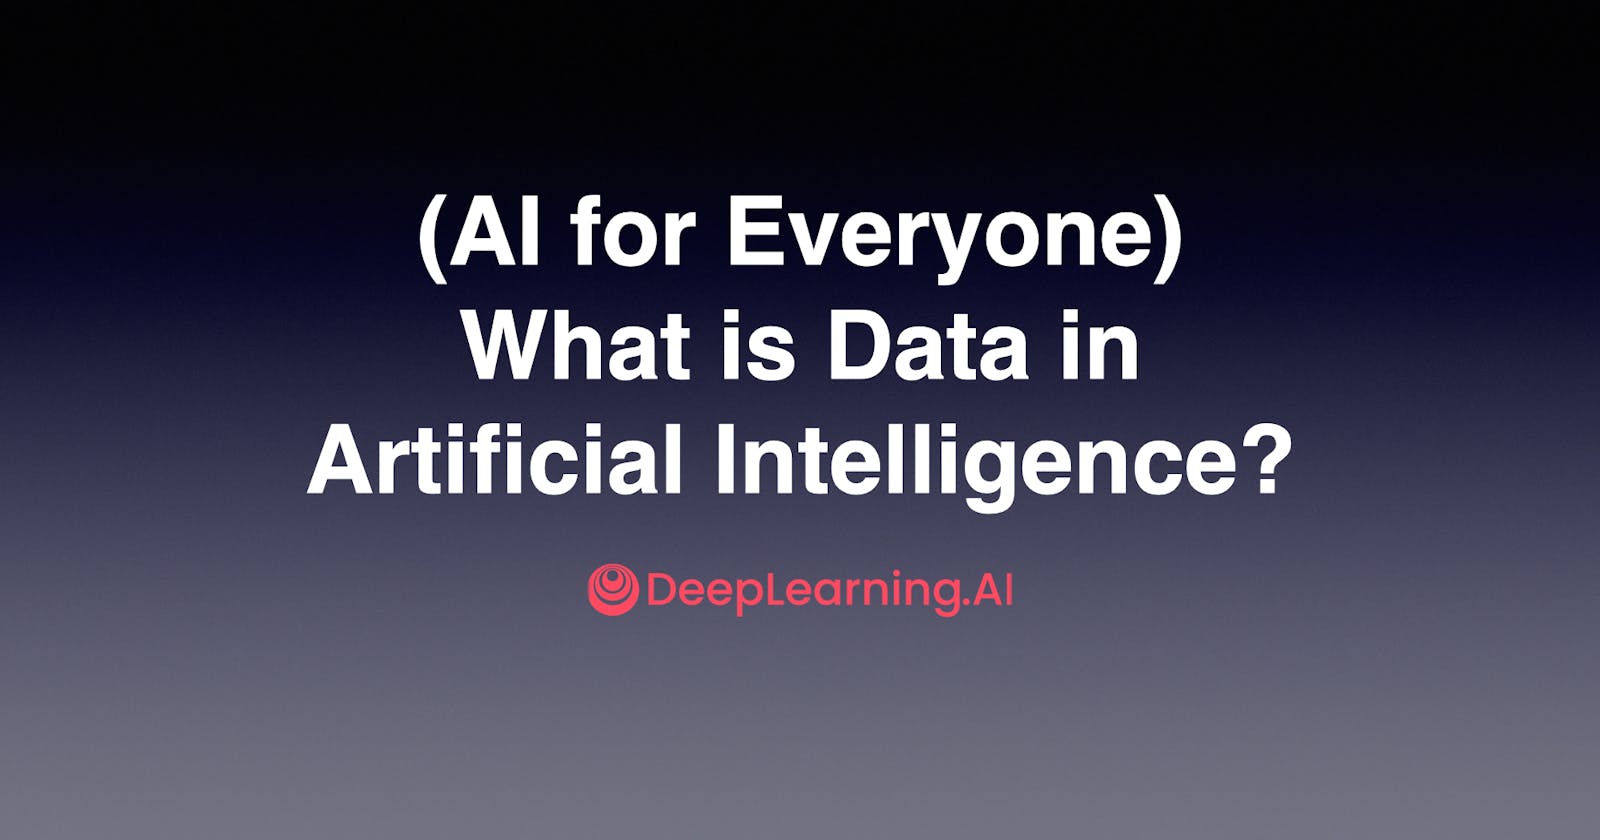 What is data in Artificial Intelligence?